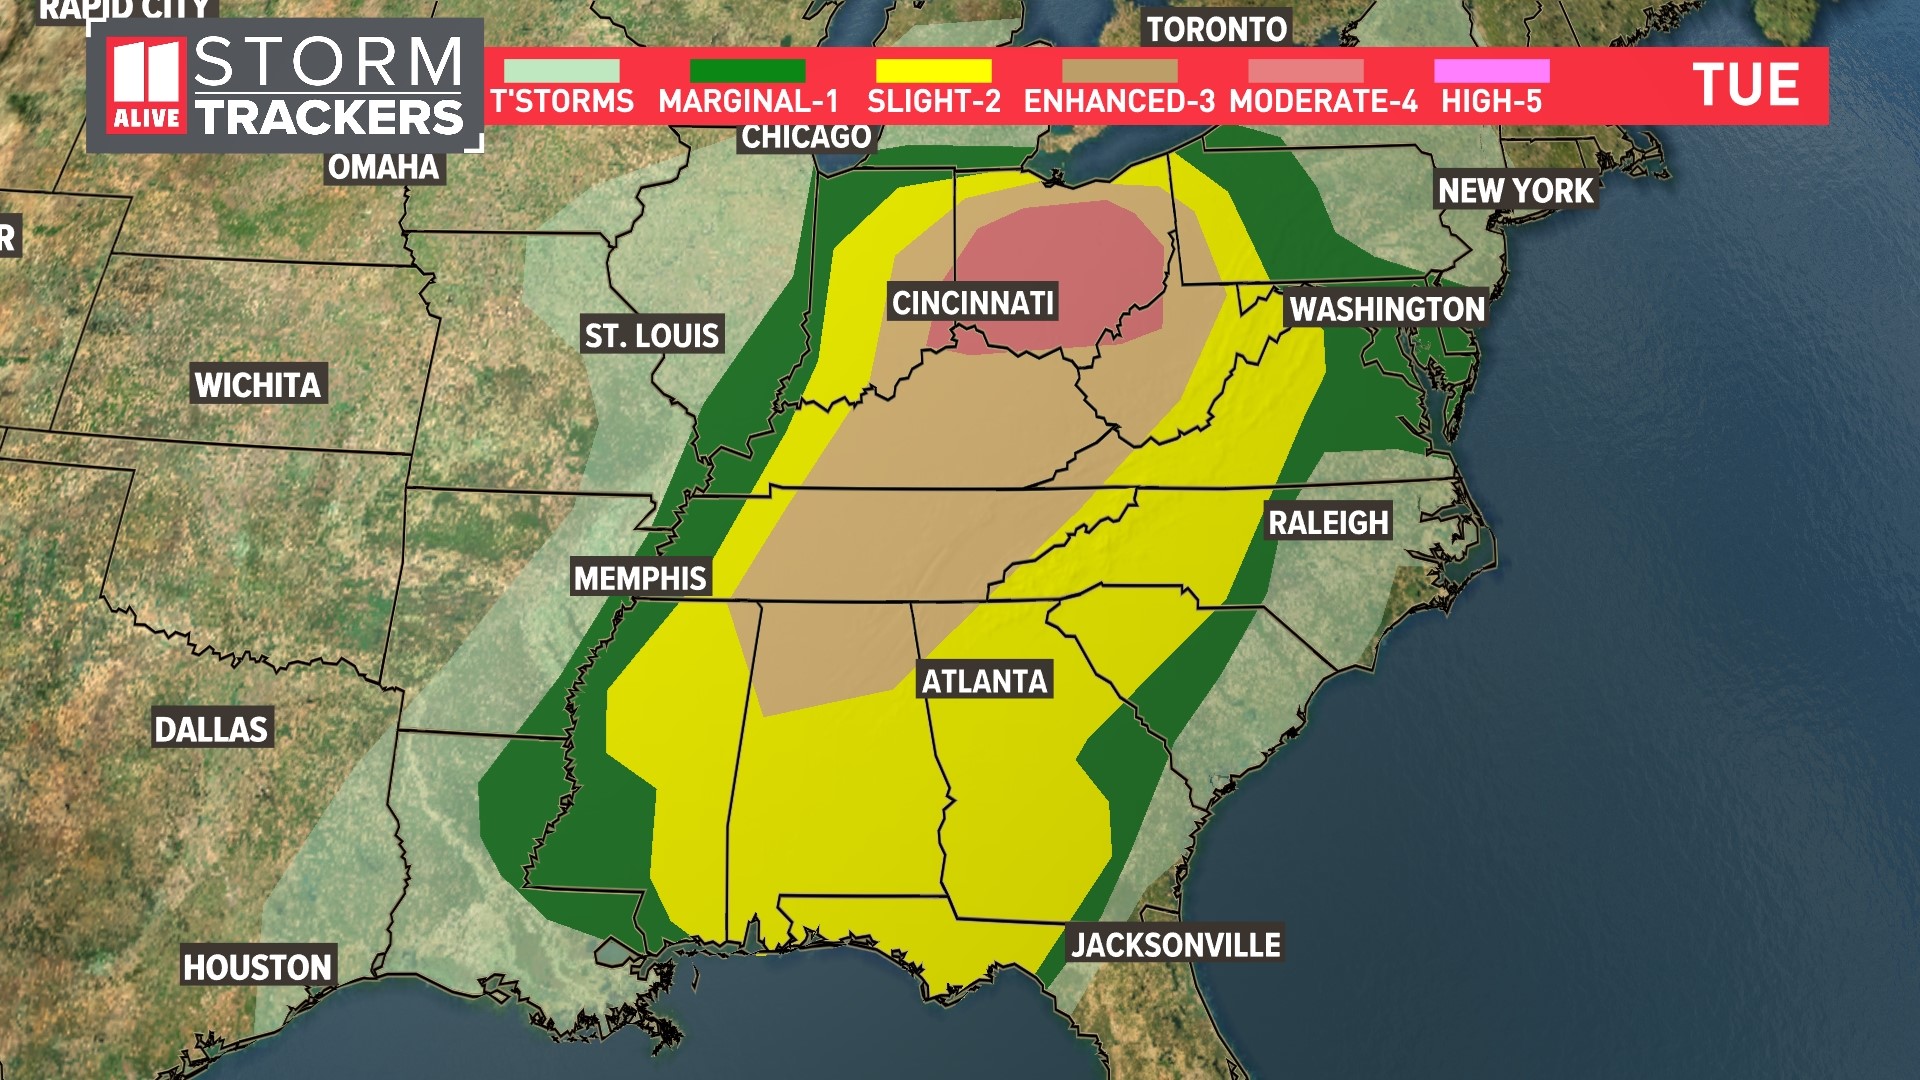 Damaging winds will be our primary severe weather threat